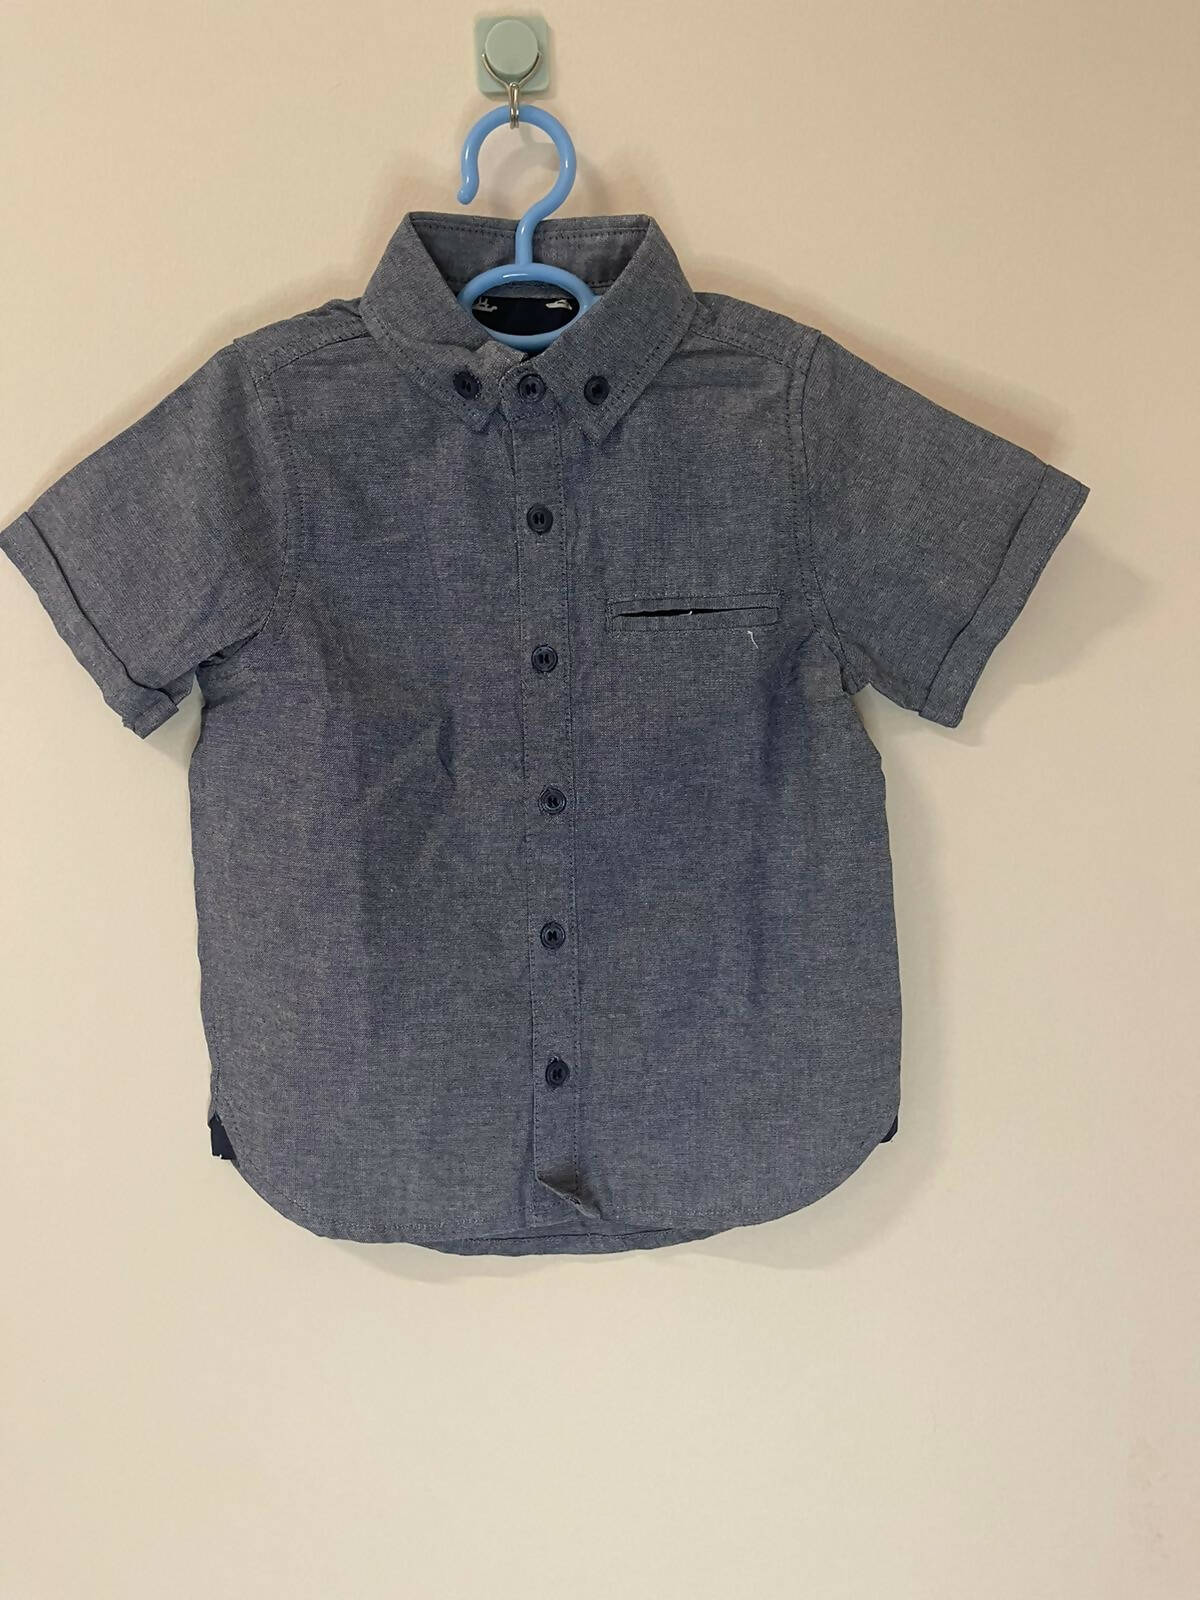 Mothercare | Blue Shirt Button down 2 years | Boys Tops & Shirts | Preloved